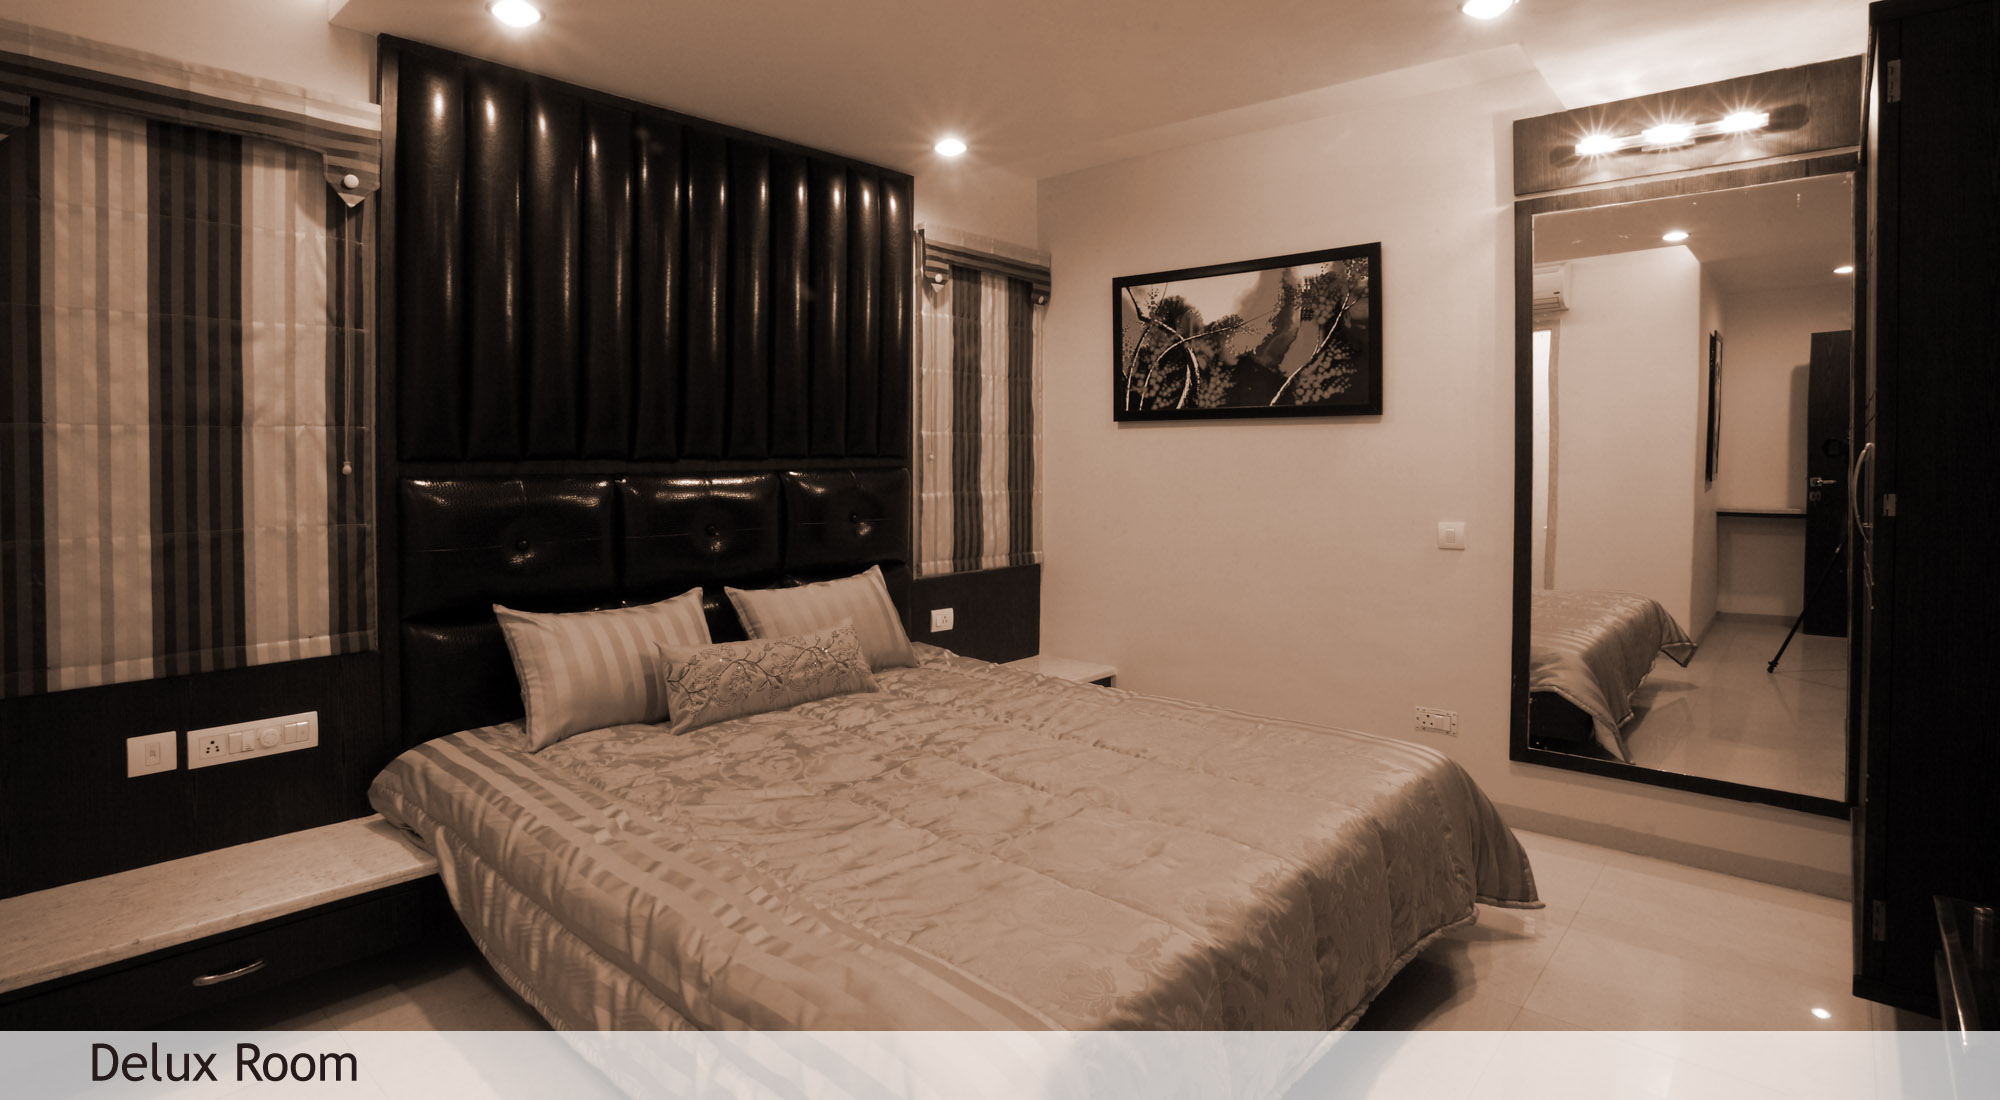 traditional style and modern comforts accommodation in Kota